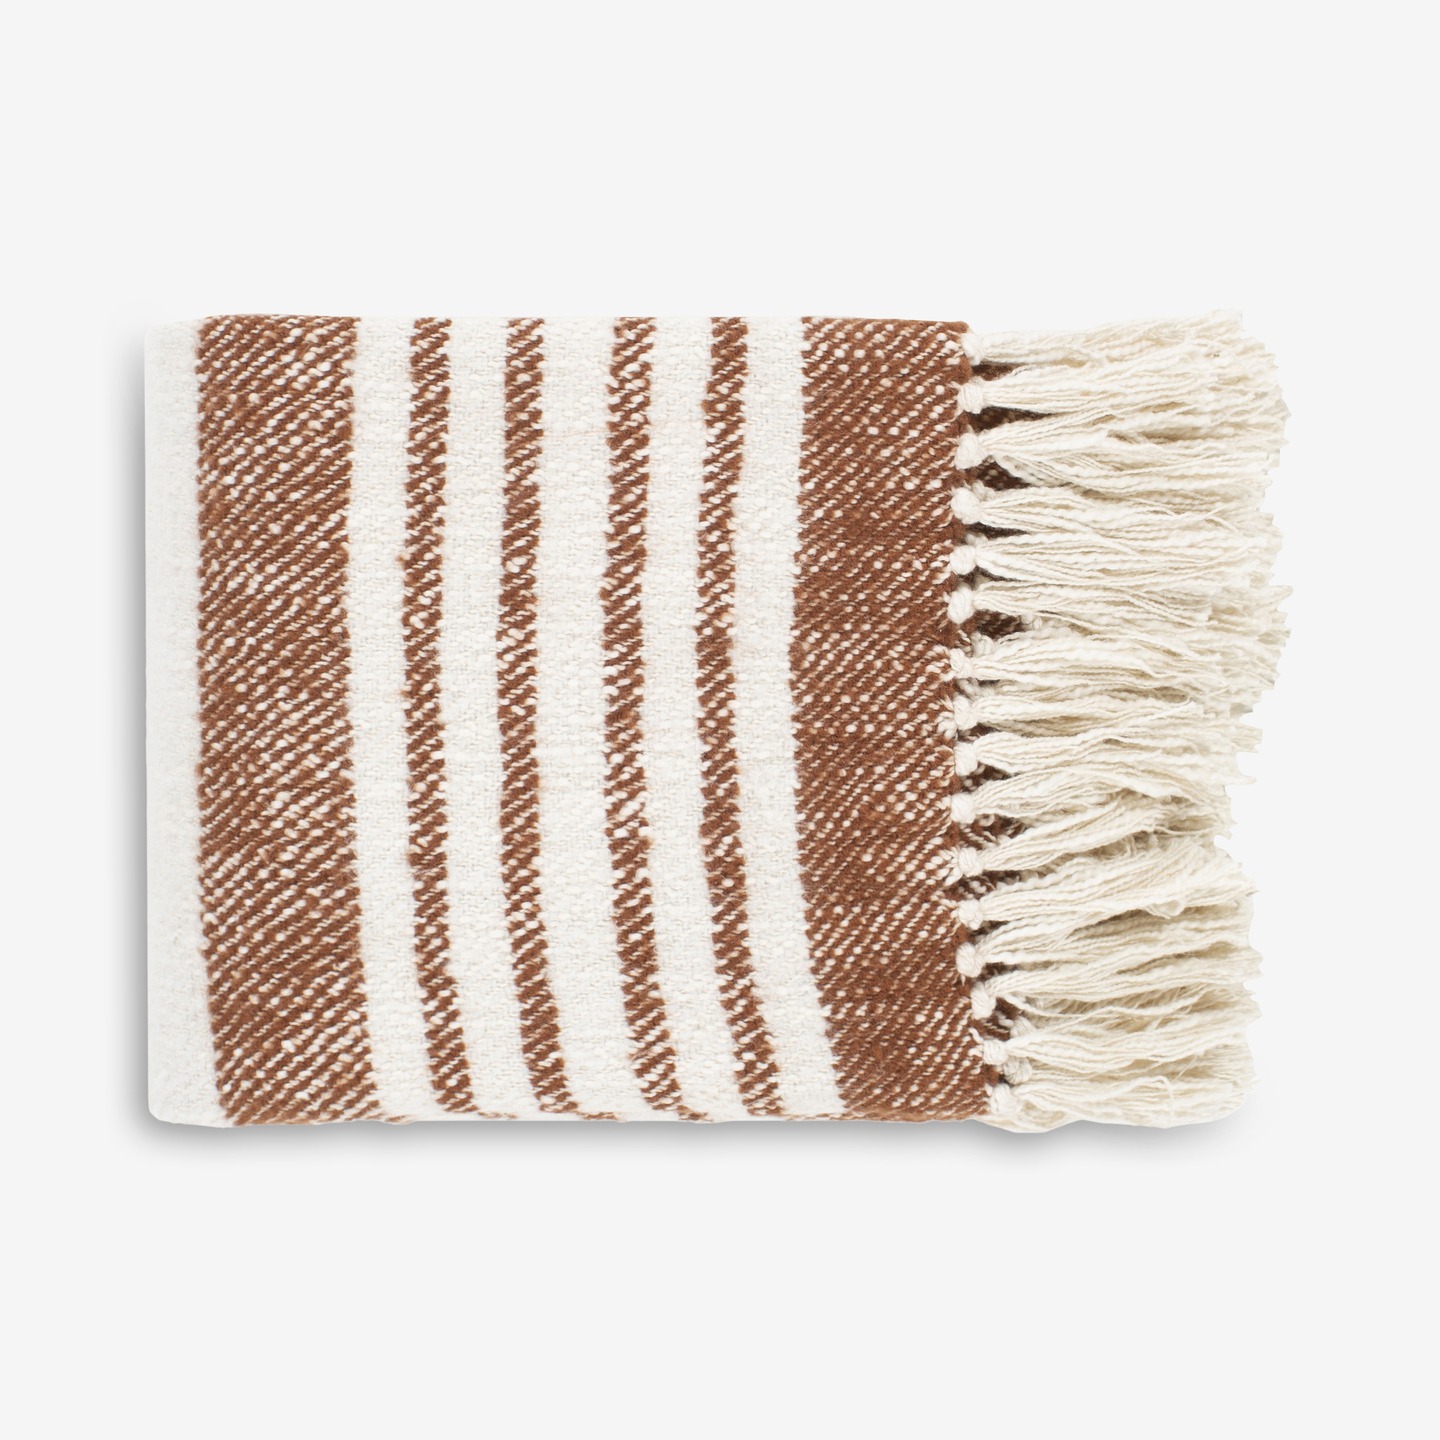 Candace Throw Blanket, Rust